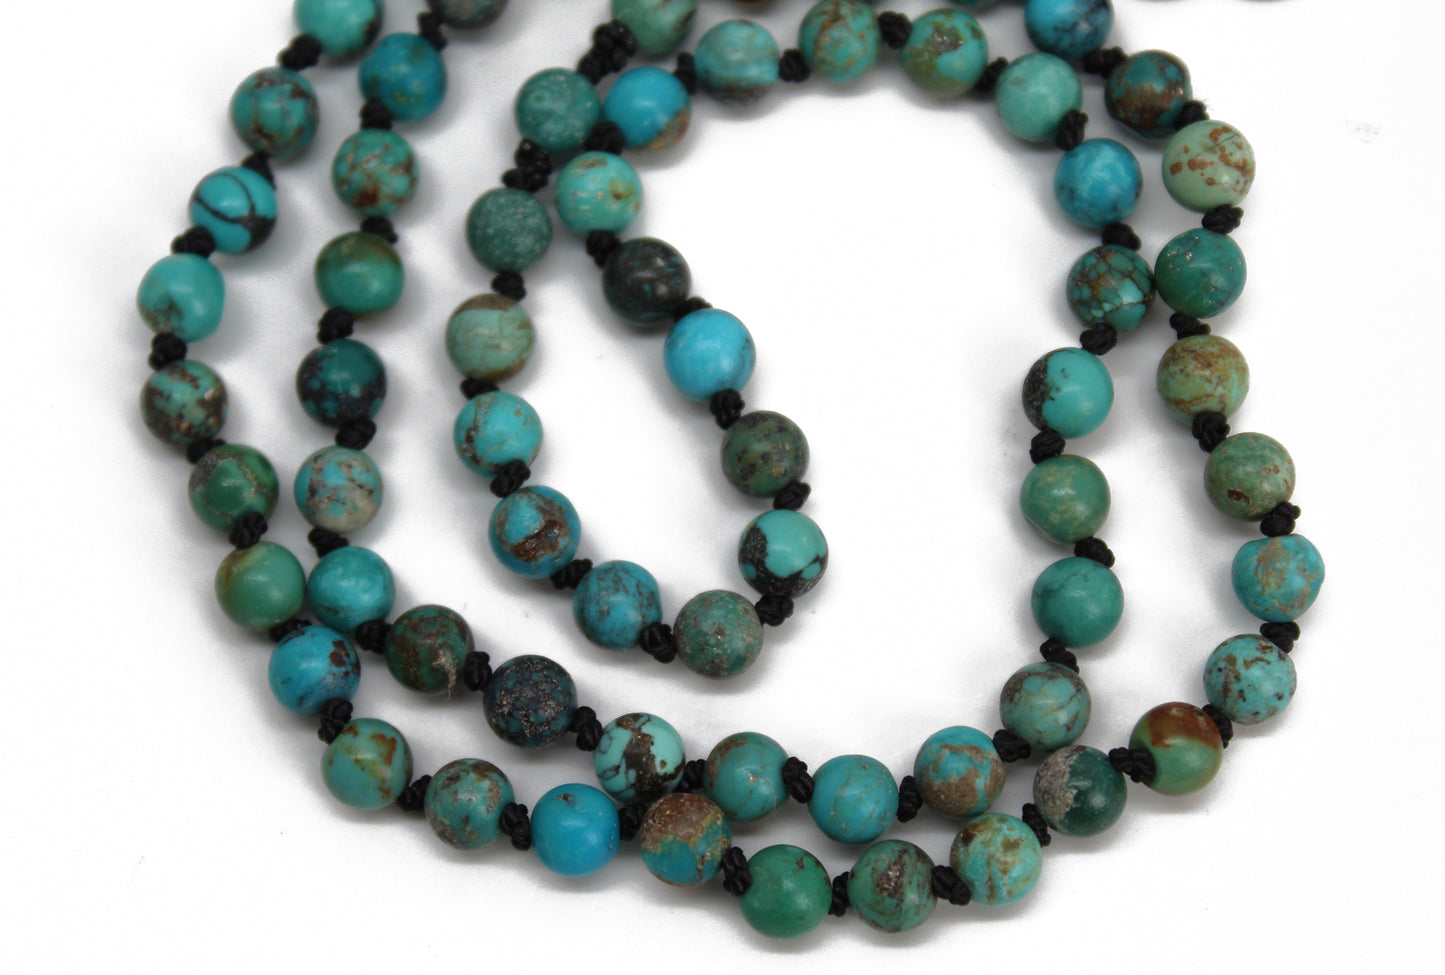 Load image into Gallery viewer, Hand Knotted Hubei Turquoise Bead Necklace, 23 Inch Endless Strand
